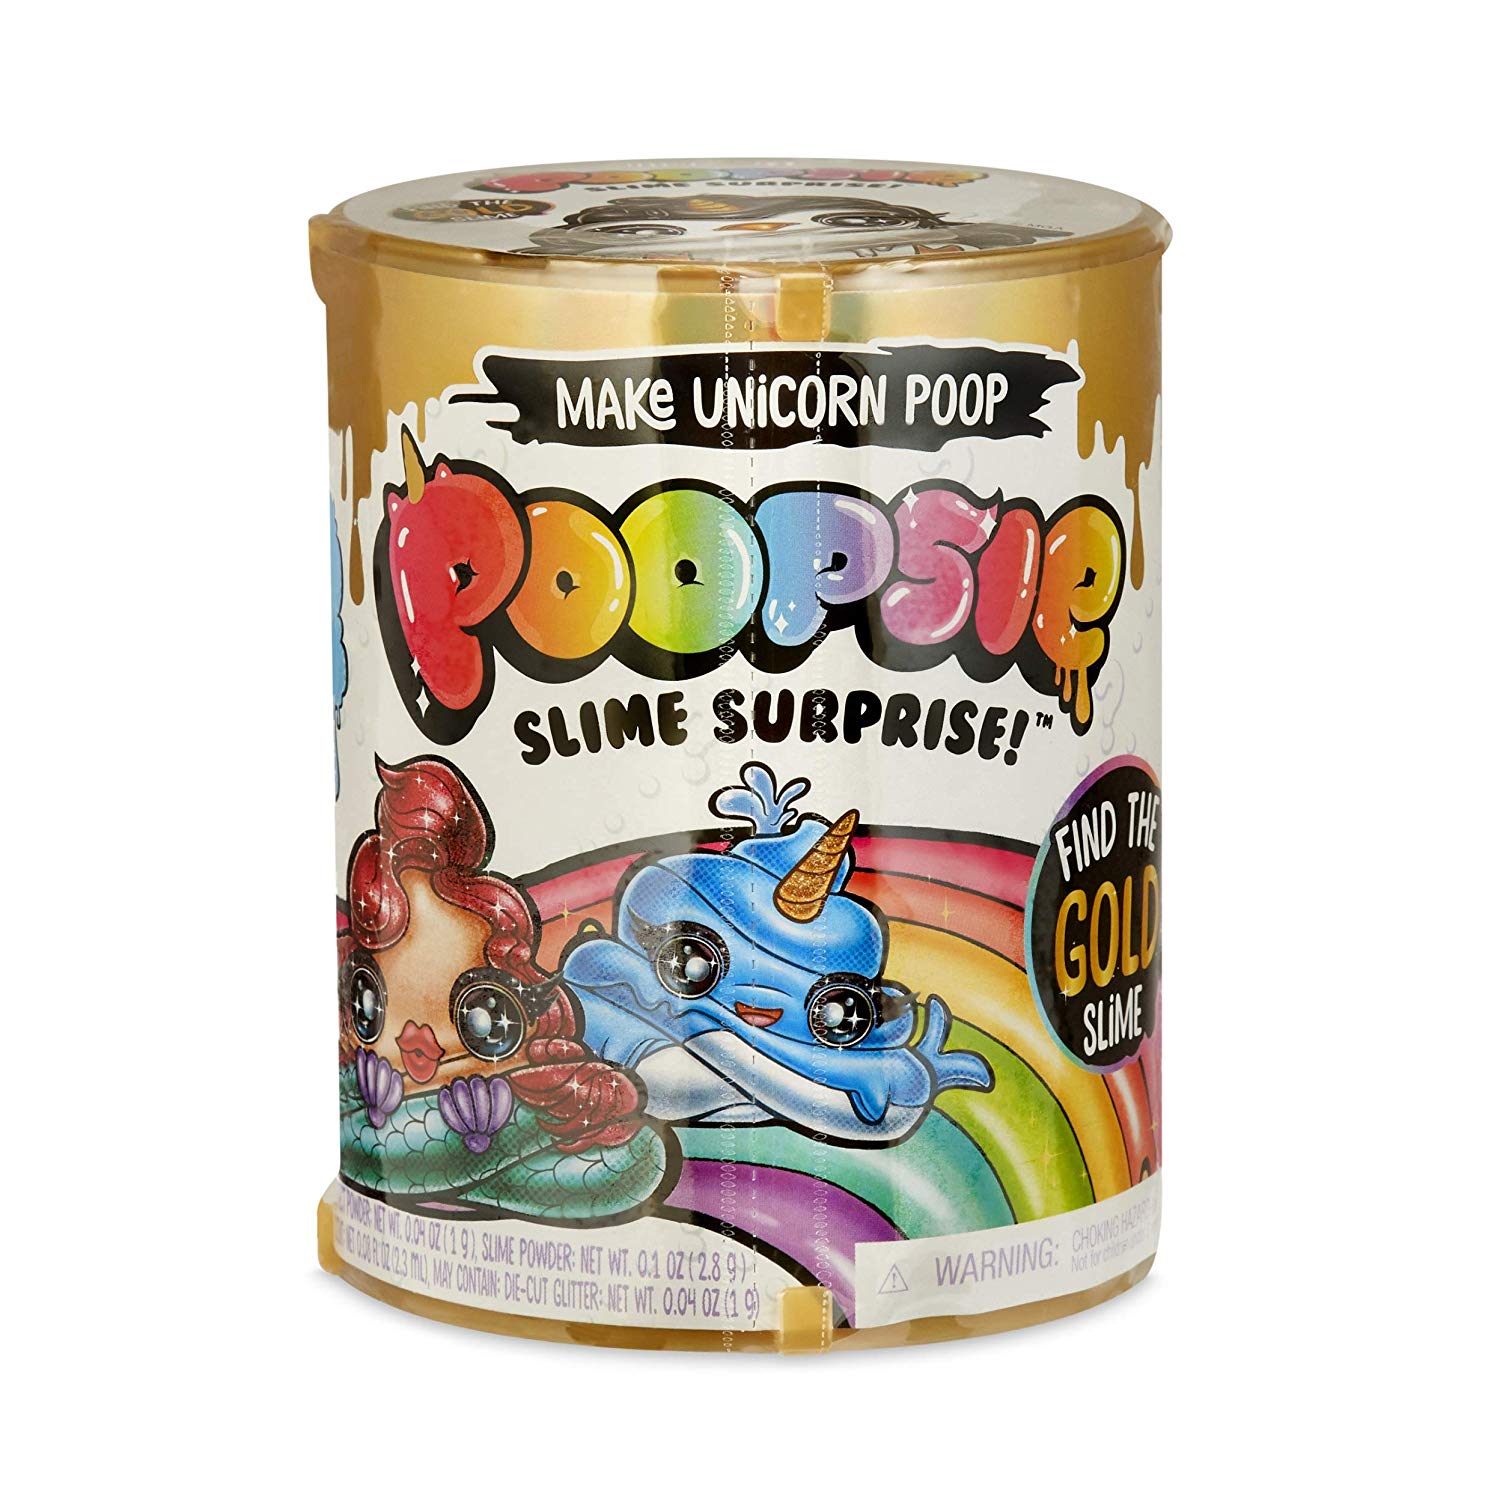 putty slime surprise